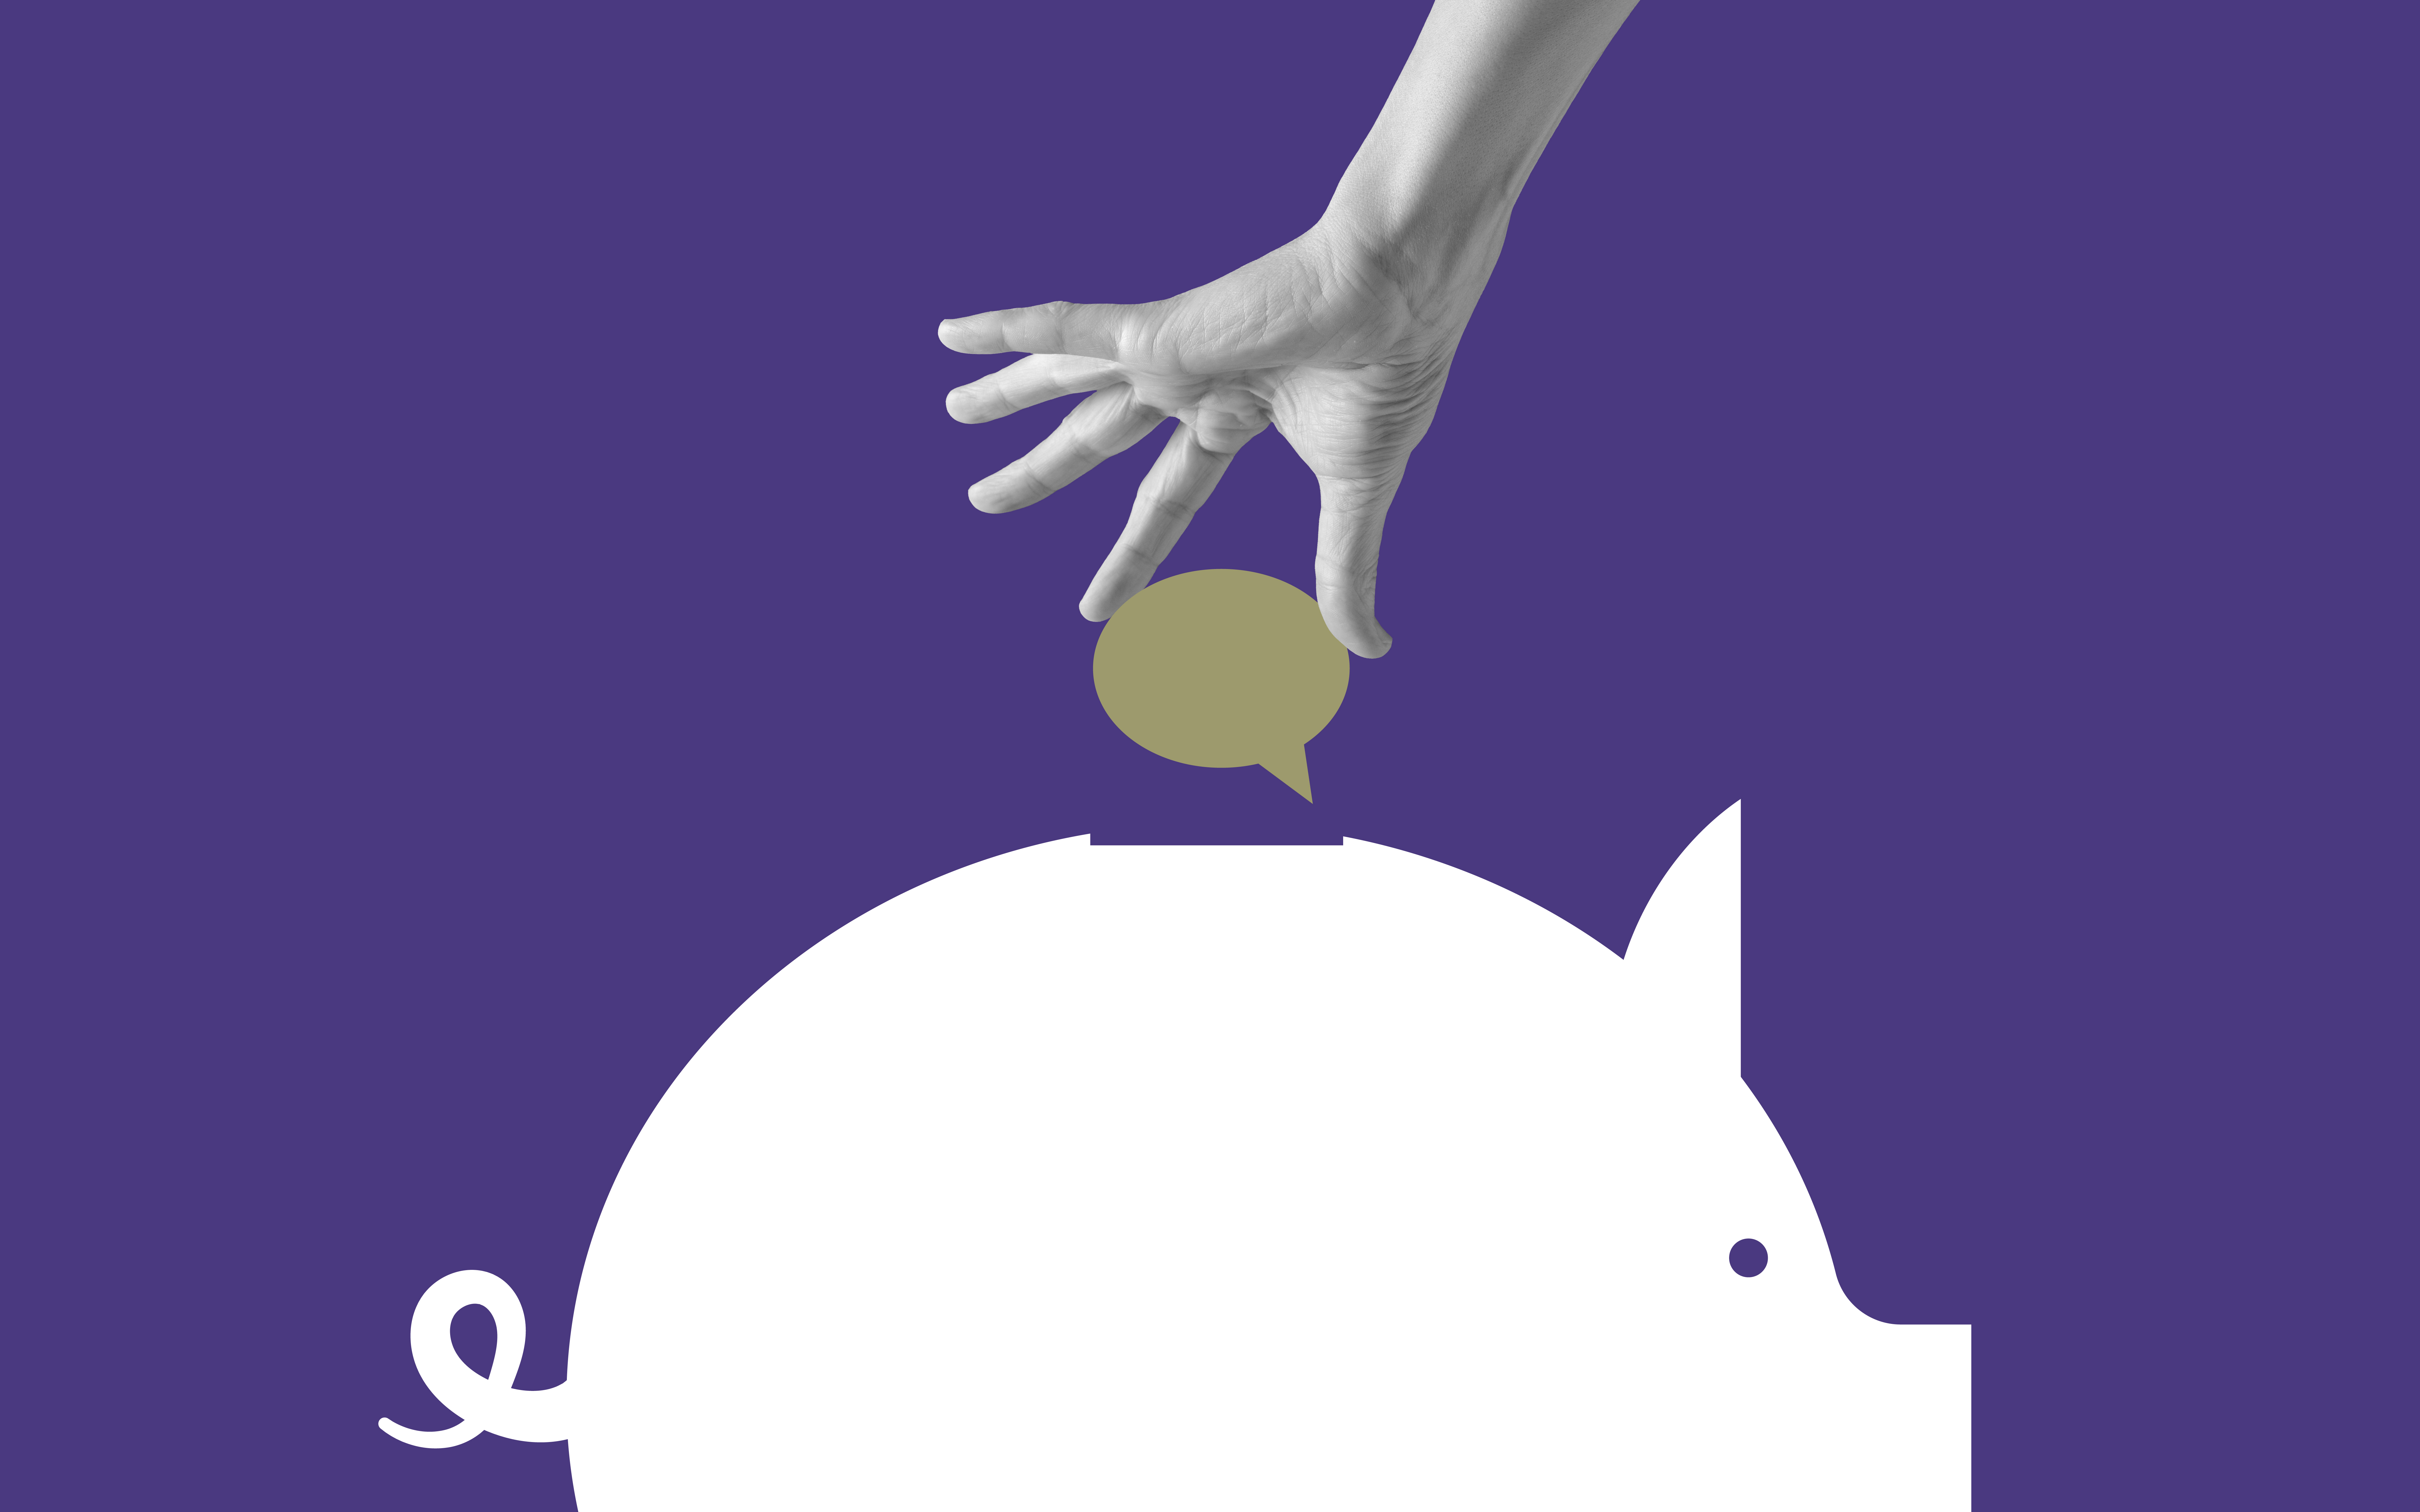 Image of hand putting speech bubble on white piggy bank on purple background.